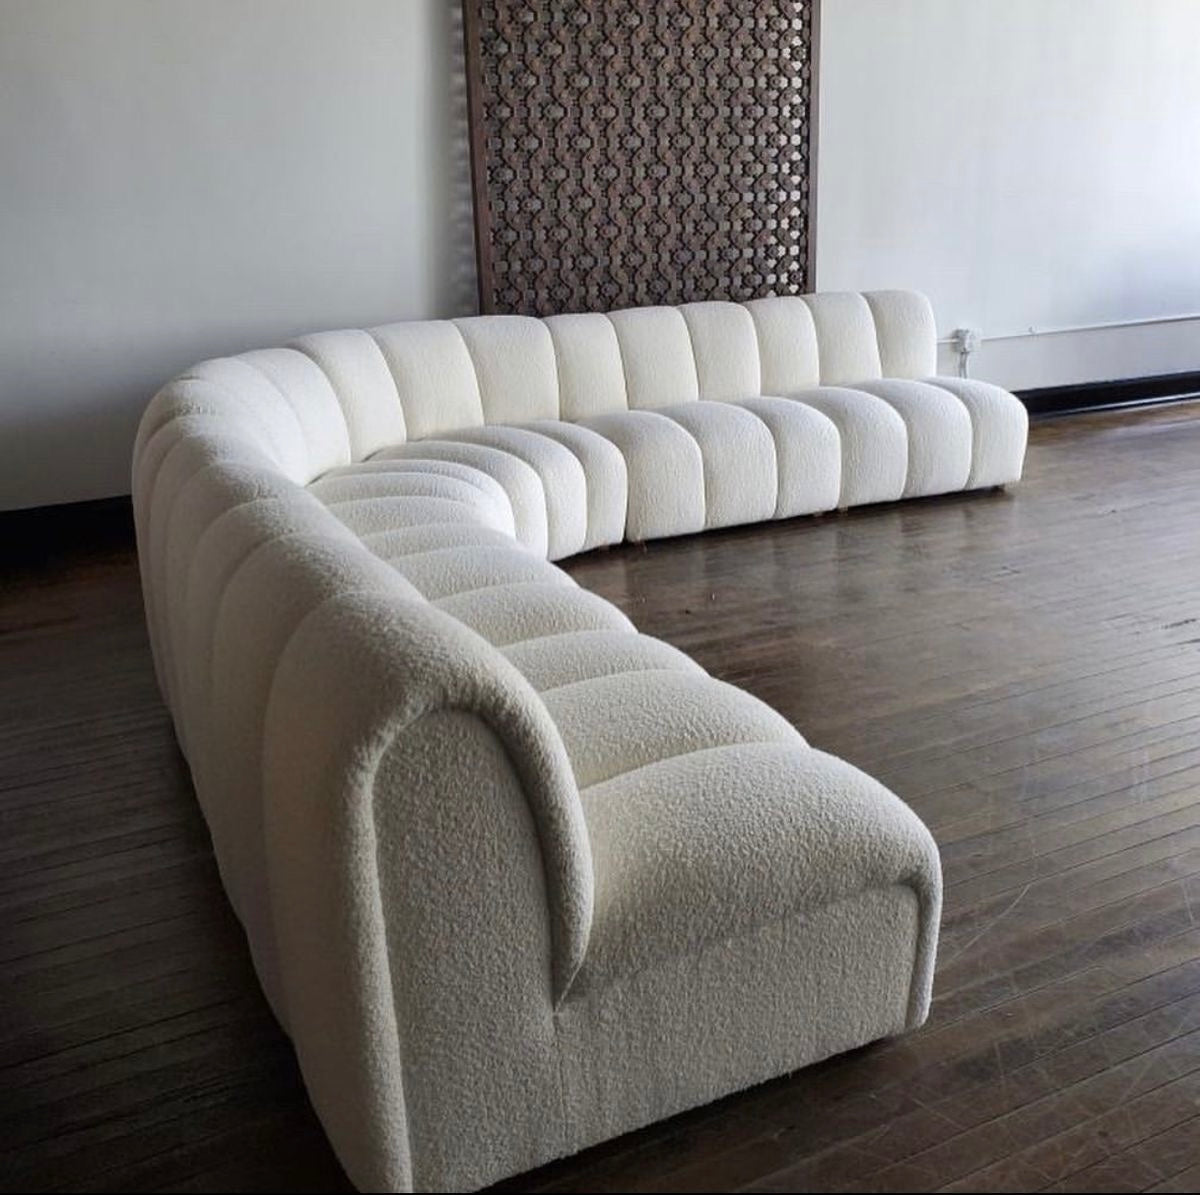 Square segment couch in boucle fabric. This couch is customisable in size and style.